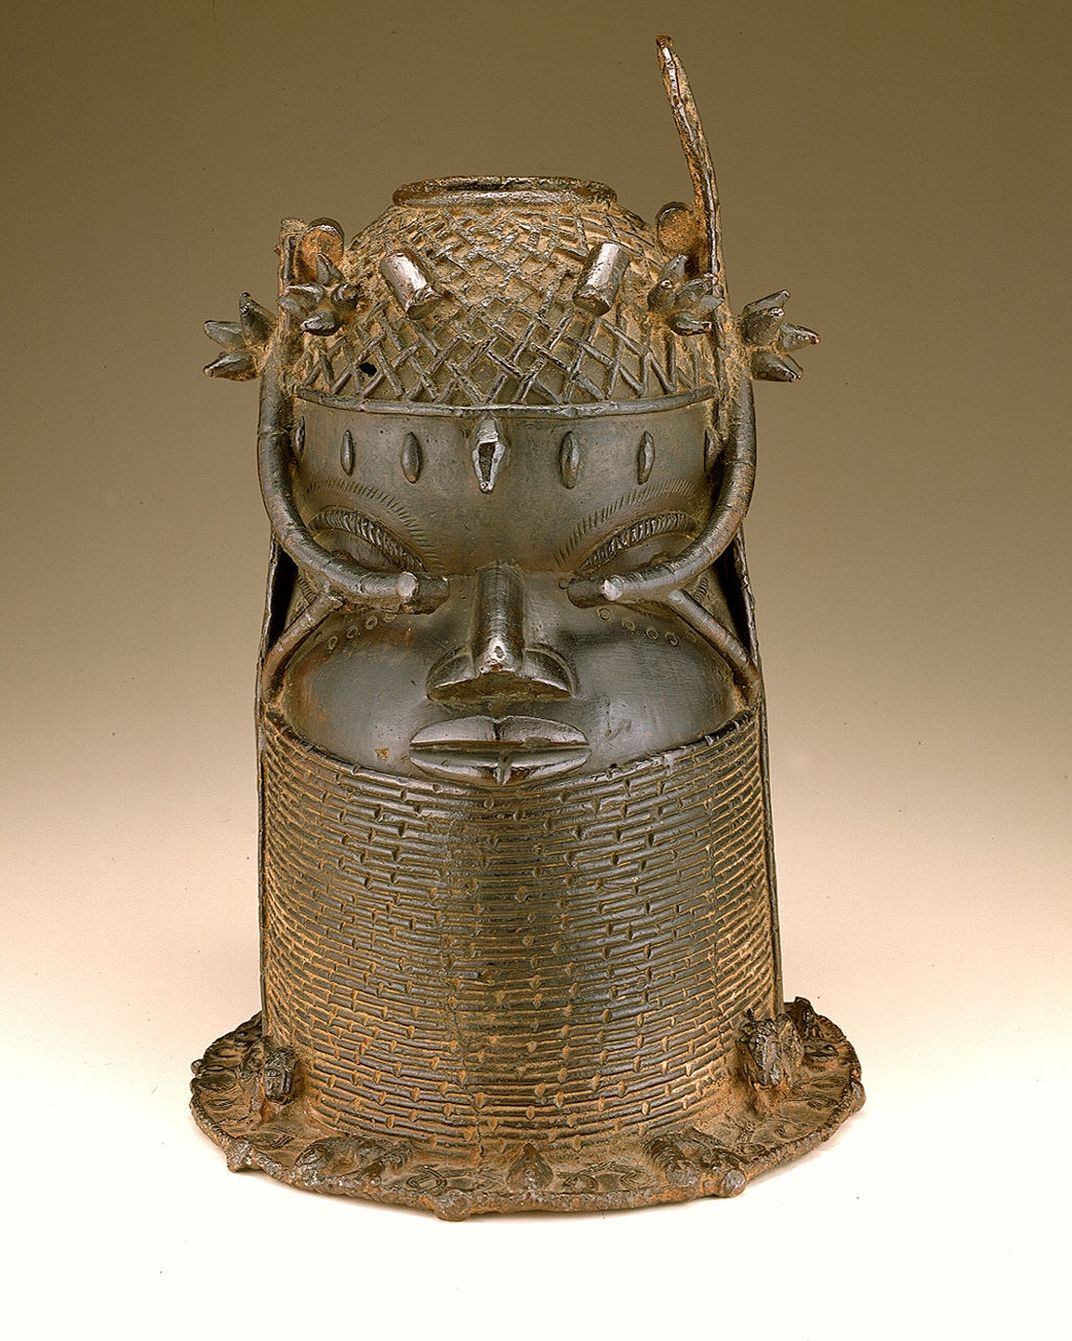 One of the Benin Bronzes returned by the Smithsonian Institution in October 2022